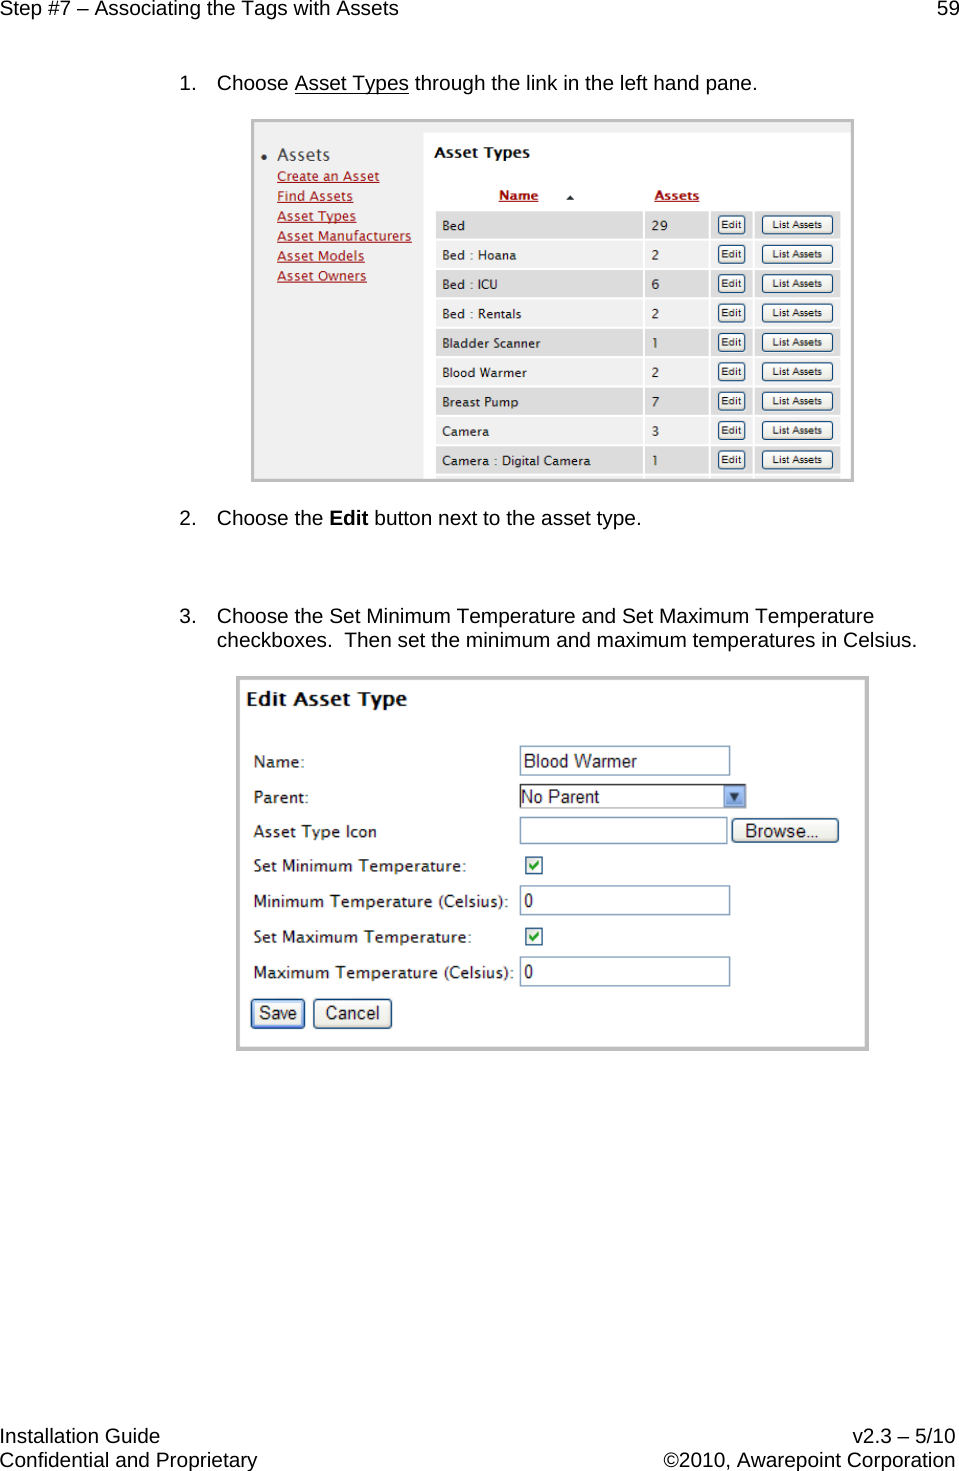 Step #7 – Associating the Tags with Assets    59   Installation Guide    v2.3 – 5/10 Confidential and Proprietary    ©2010, Awarepoint Corporation  1. Choose Asset Types through the link in the left hand pane.  2. Choose the Edit button next to the asset type.  3. Choose the Set Minimum Temperature and Set Maximum Temperature checkboxes.  Then set the minimum and maximum temperatures in Celsius.       